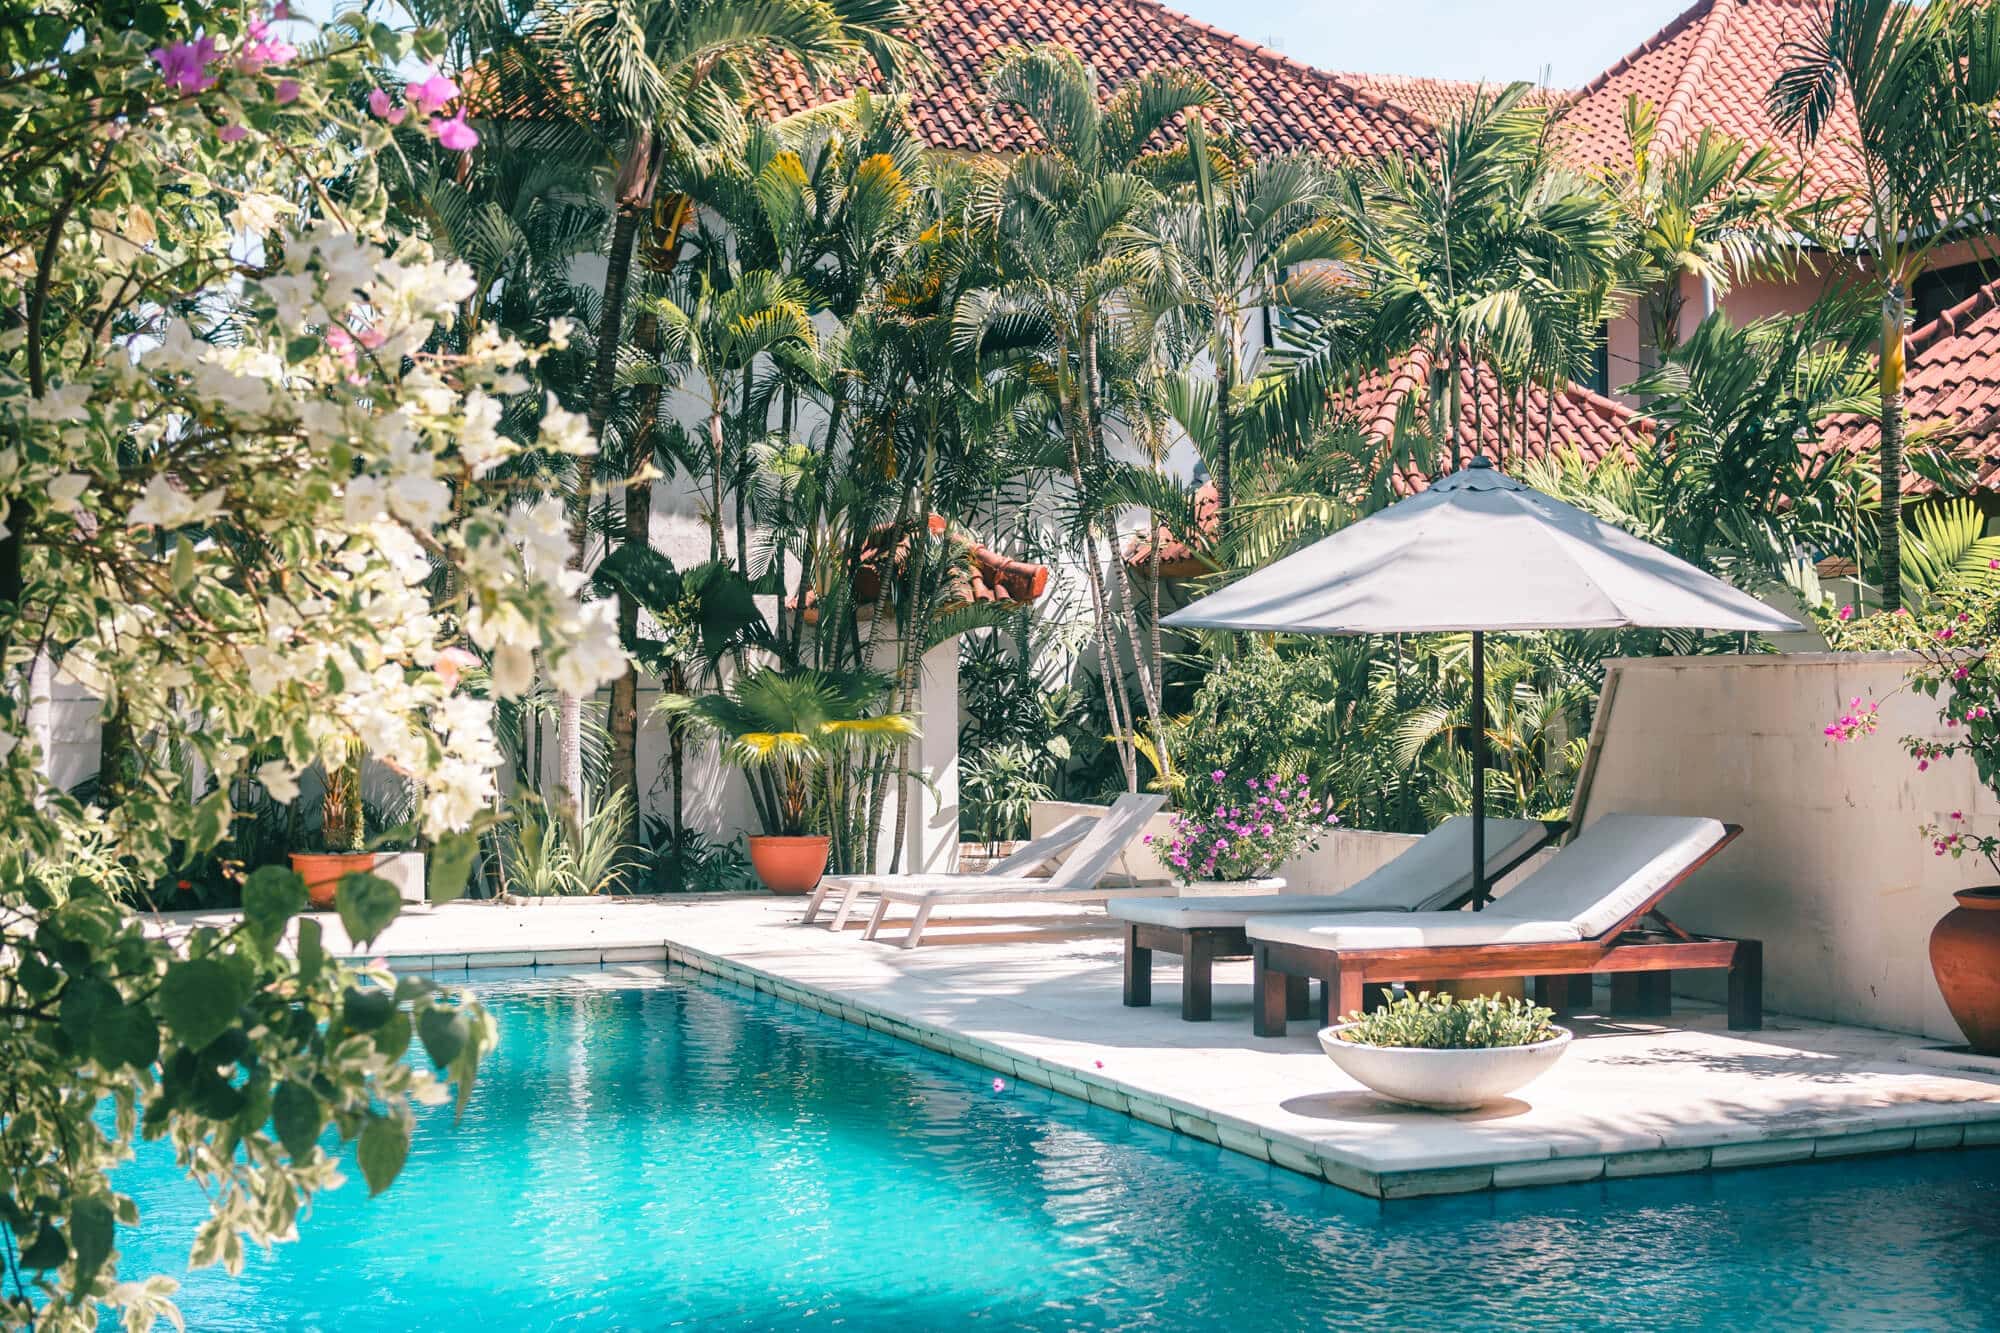 Two sunbeds and a parsol by a turquoise pool surrounded by palms and flowers at a private pool villa, one of the top things to do in Bali.